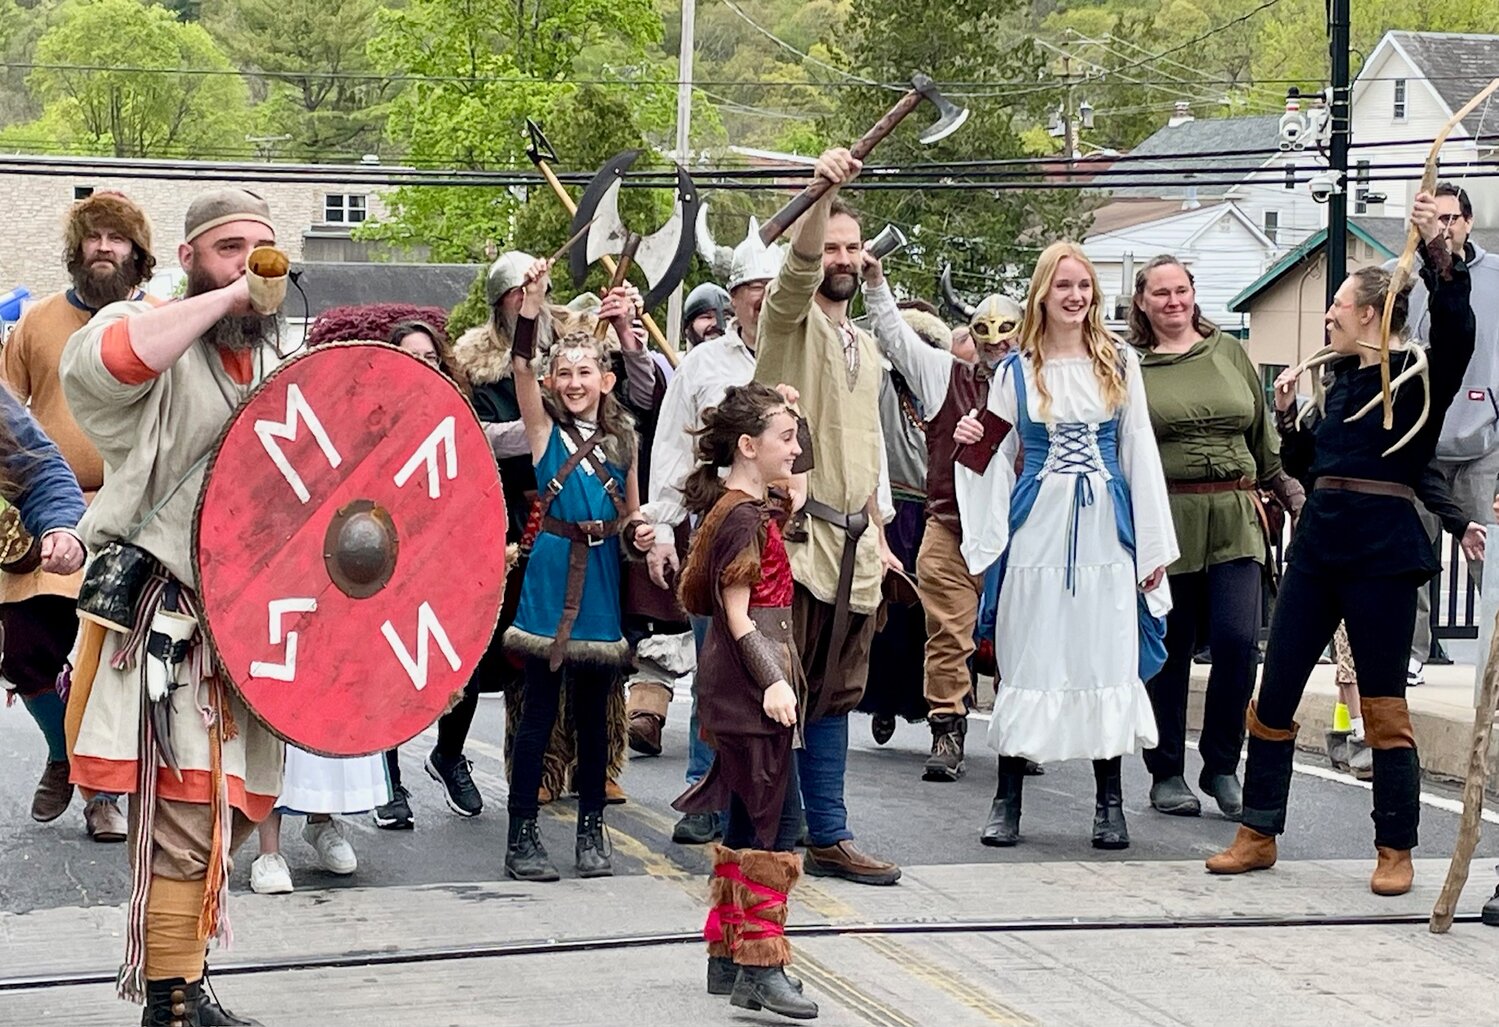 The horde assembles in Upper Black Eddy, Bucks County, for the invasion of Milford, Hunterdon County, at the start of Saturday’s Viking Fest.